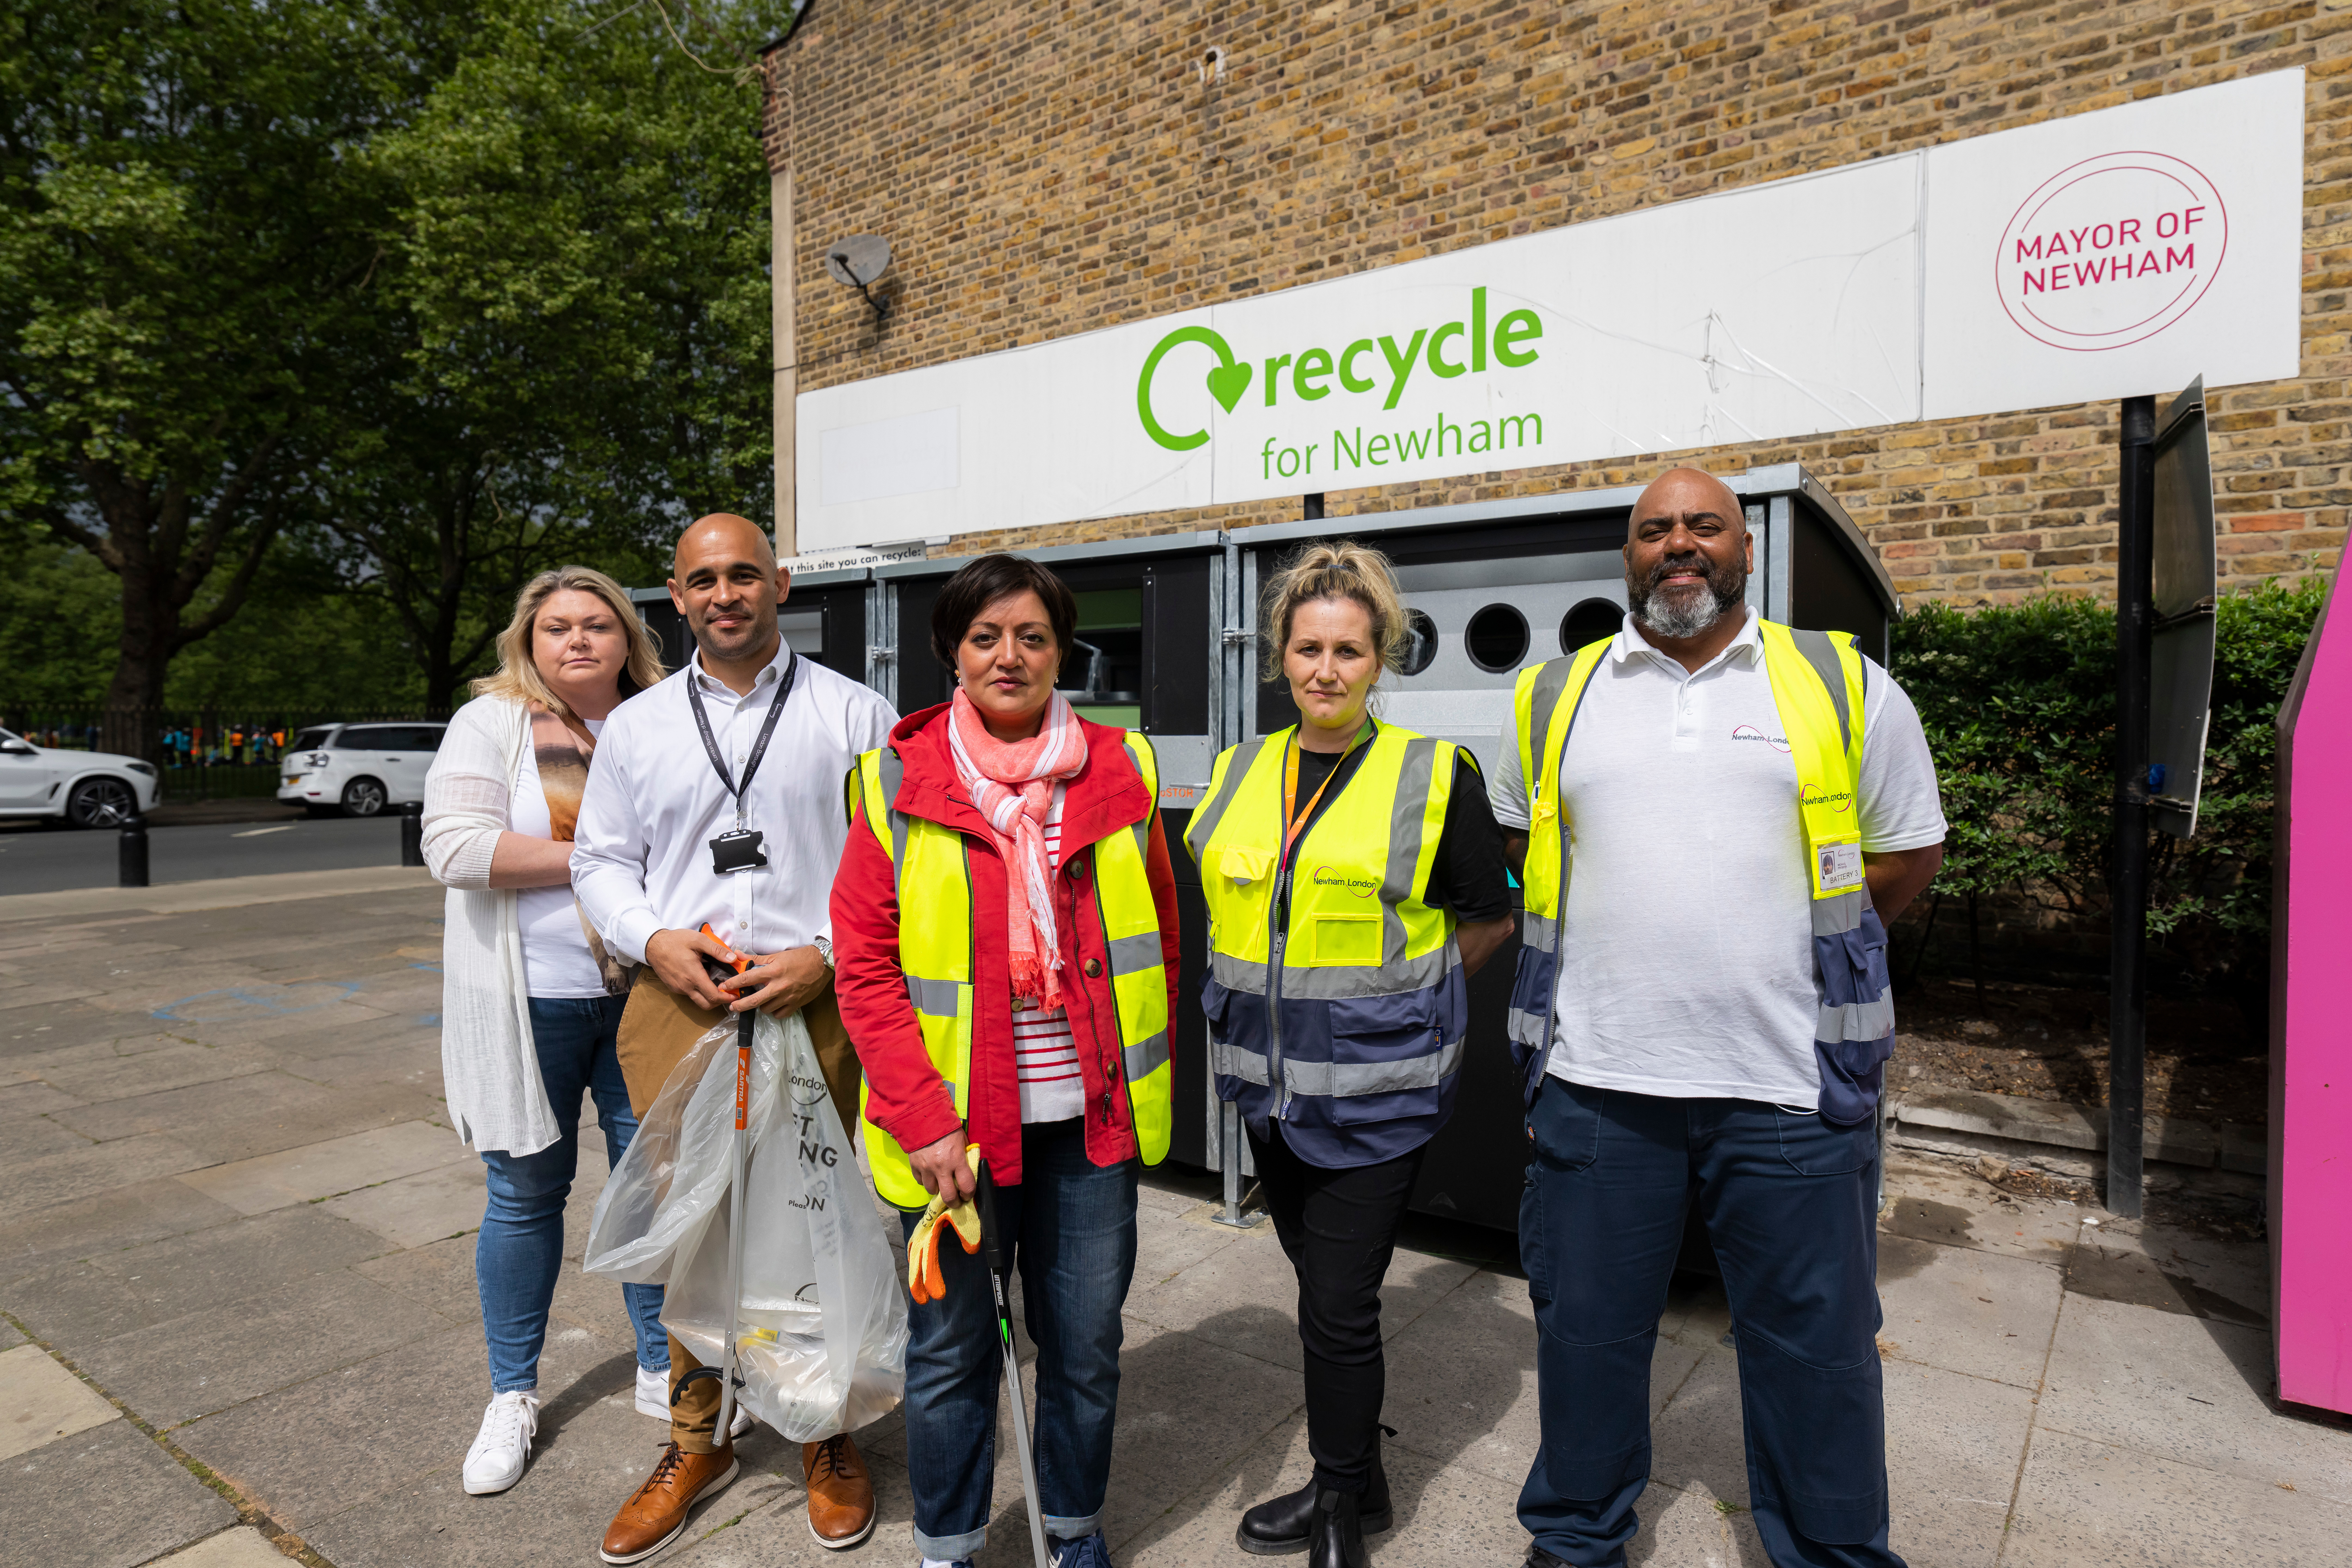 Image of the Mayor and others in front of a 'recycle for newham' sign